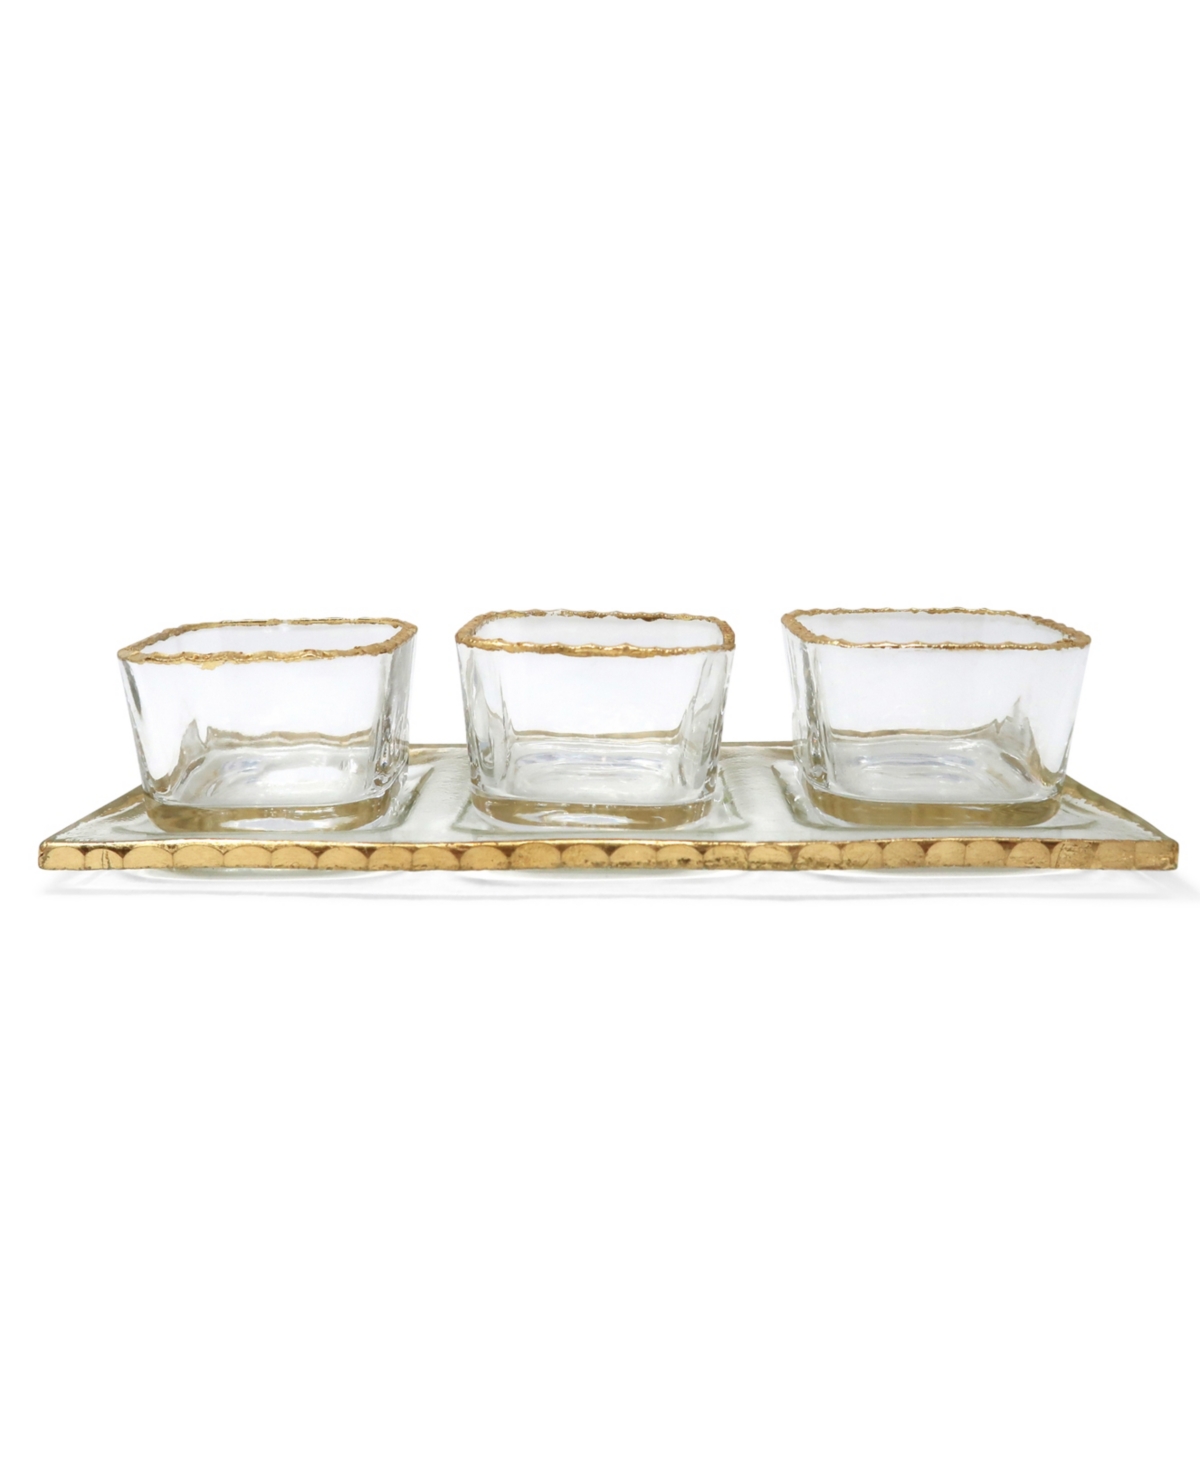 3 Bowl Relish Dish on Tray with Gold-Tone Rim, 4 Piece Set - Gold